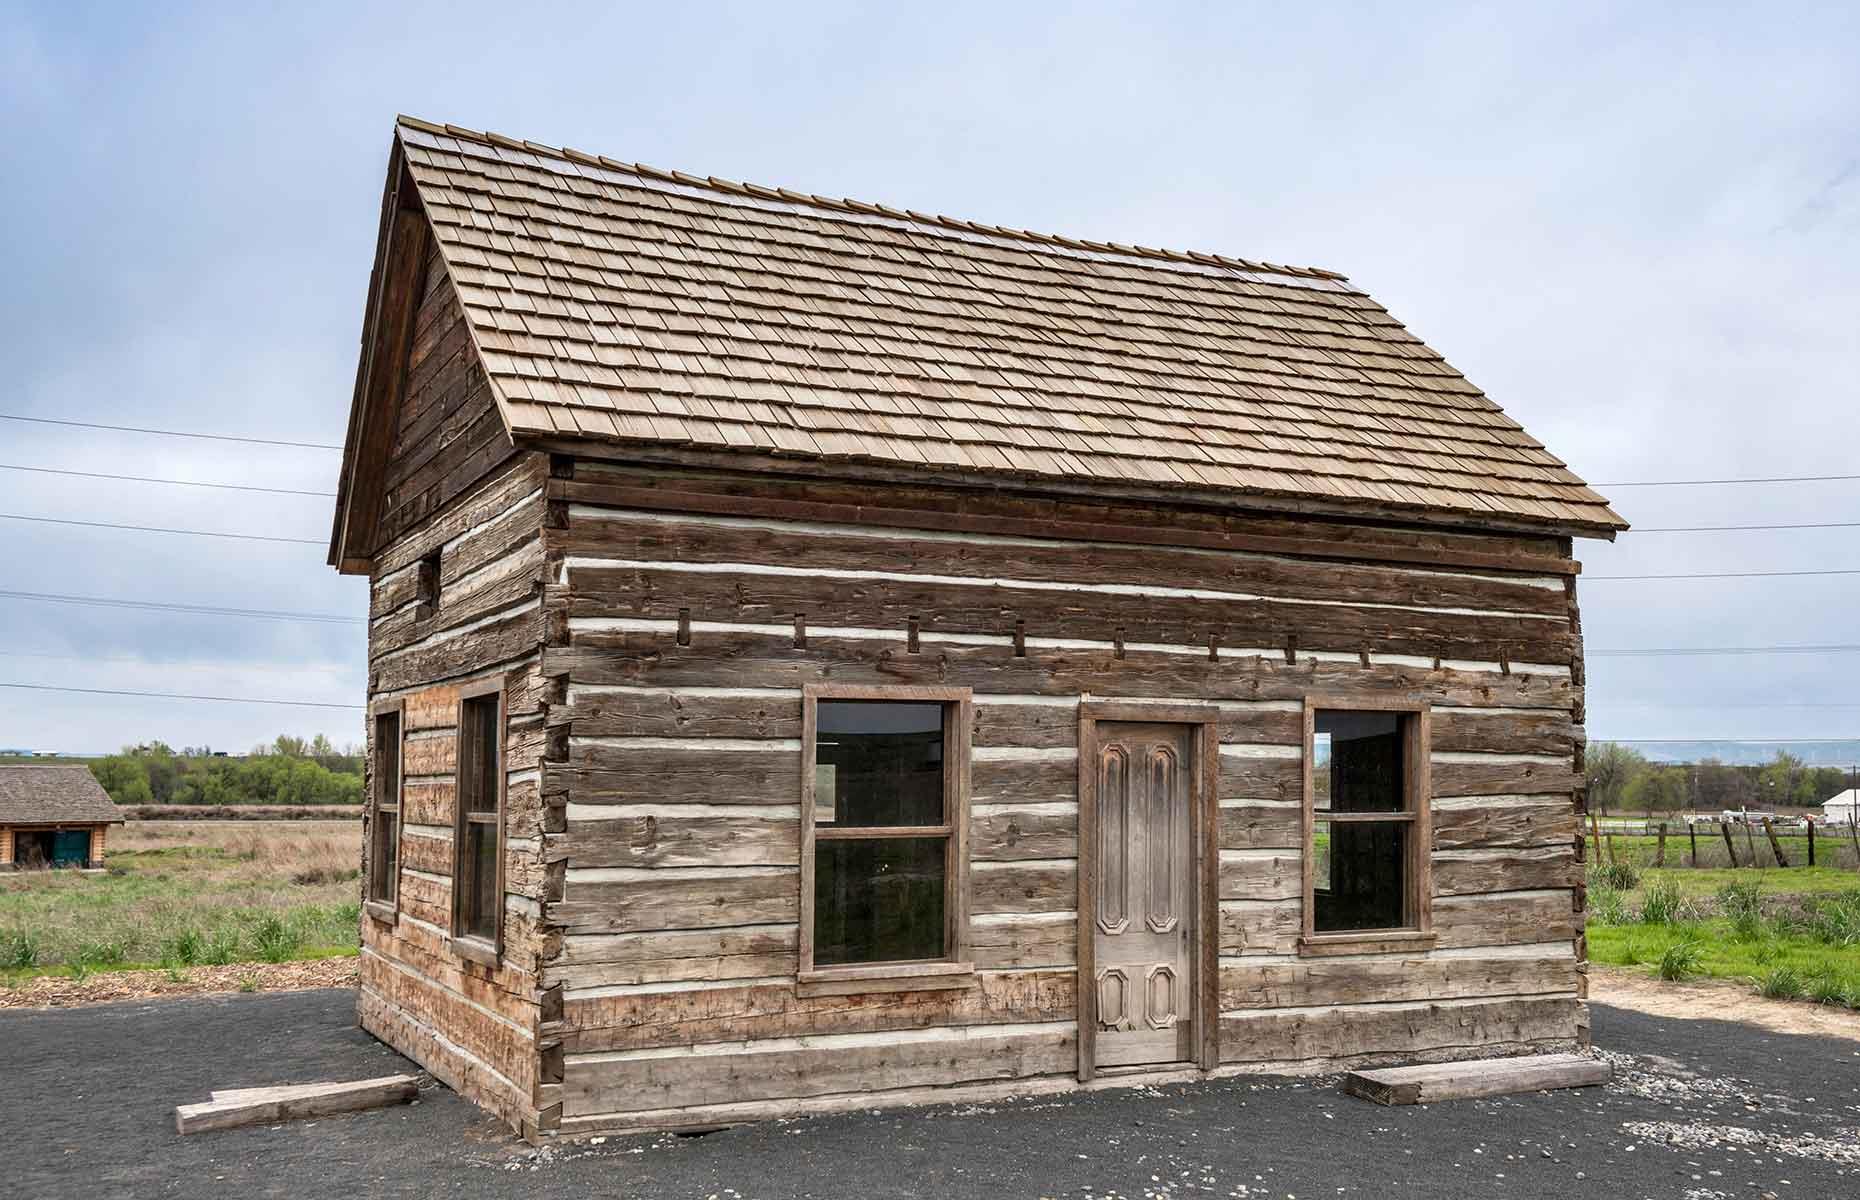 <p><a href="https://landmarkhunter.com/208819-princes-cabin/">Prince’s Cabin</a> is a small timber structure built in 1837 by the Hudson's Bay Company for a Cayuse headman known as 'the Prince'. It later became the property of non-native owners, and moved from its original location to the Frenchtown Historic Site in Walla Walla. Unfortunately, you can’t step inside this time capsule from the 19th-century Pacific Northwest. Still, there are <a href="https://www.hmdb.org/m.asp?m=158823">historical markers</a> and interpretative panels dotted around outside so you can find out more.</p>